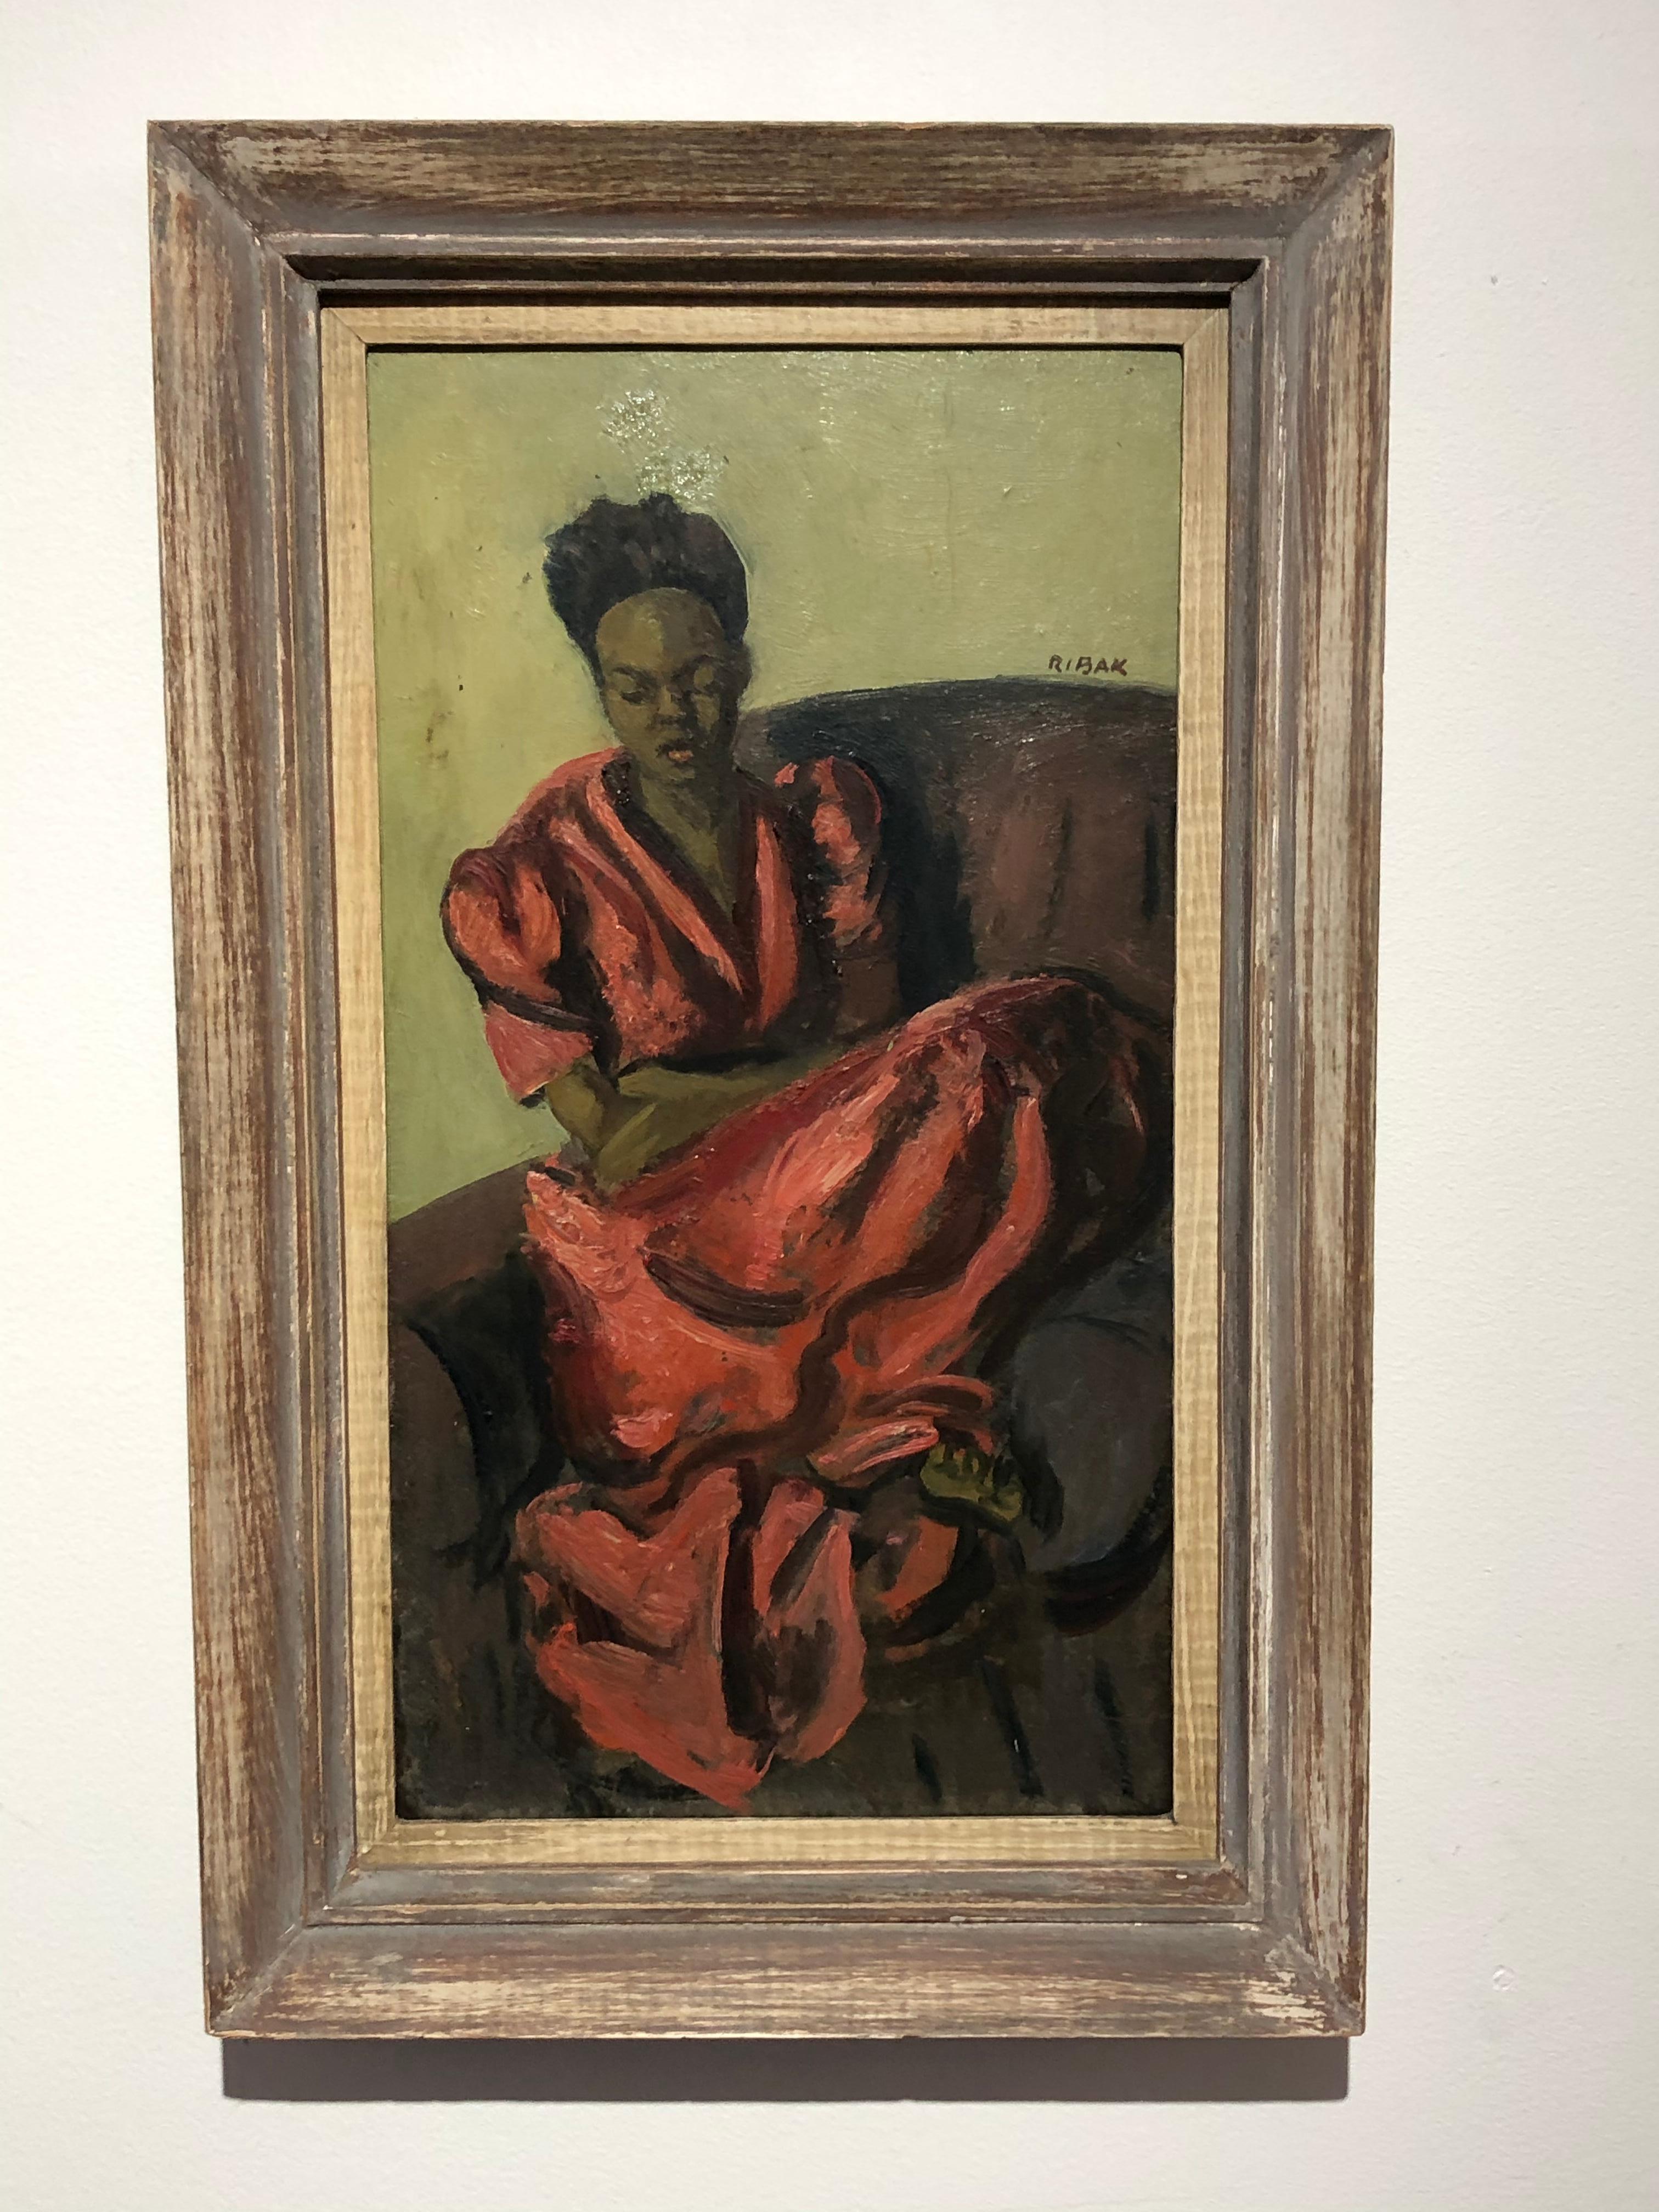 Louis Leon Ribak oil on Masonite board , title “ Ruby in Red” seated African American girl in red dress . In original frame with original label .painting size with out frame is 17.75 x 9.75 .
Born in the then-Lithuanian province of Grodno, Ribak